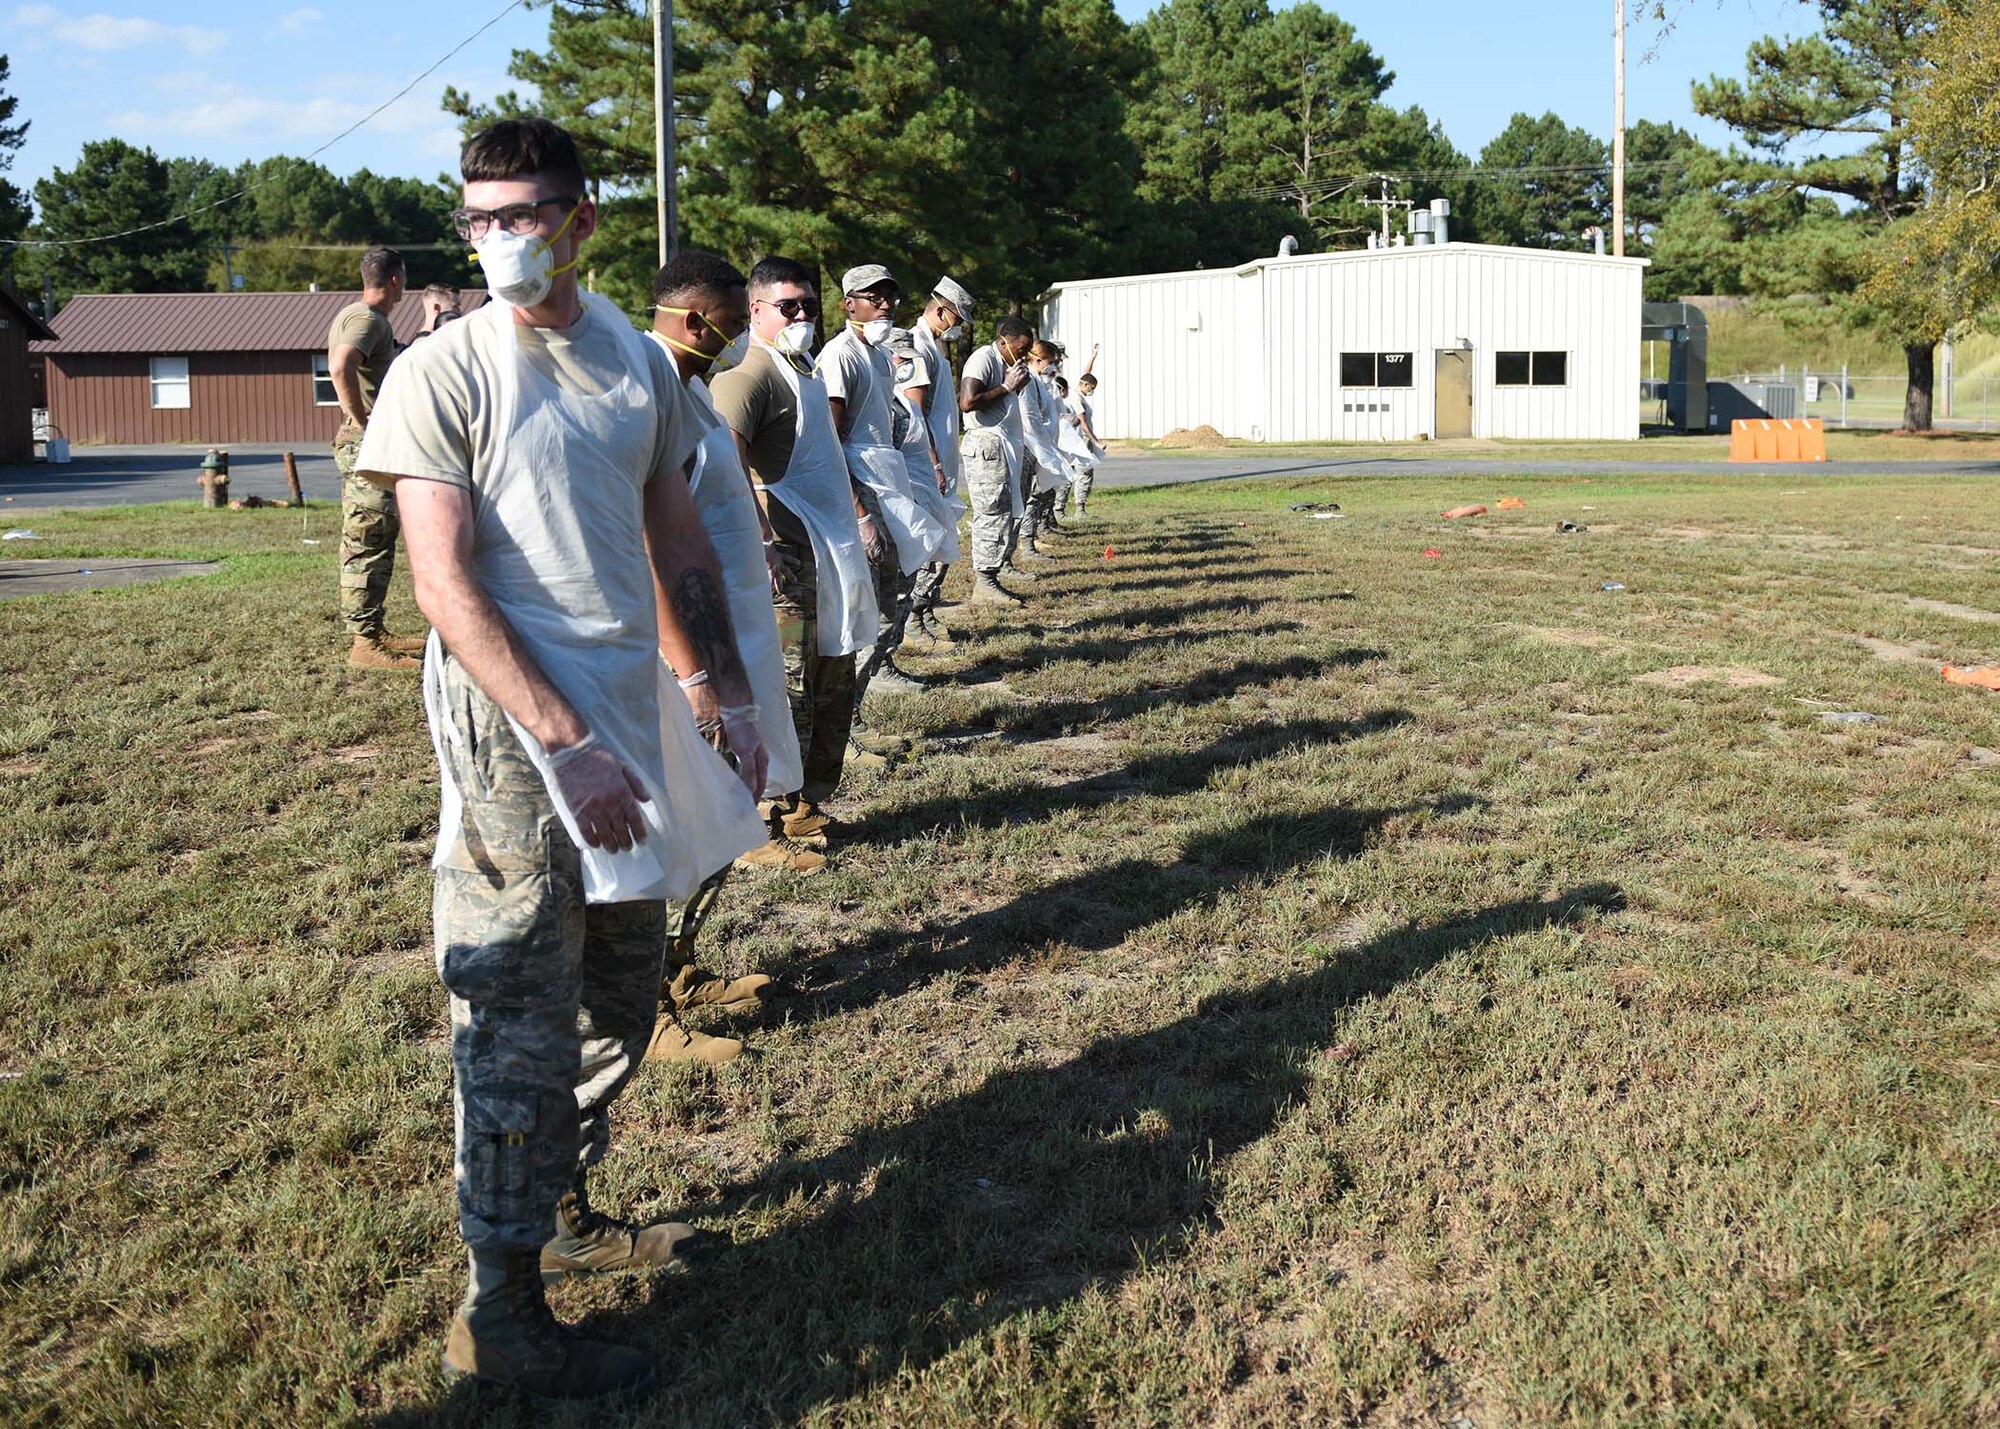 Airmen stand in a row in a field.